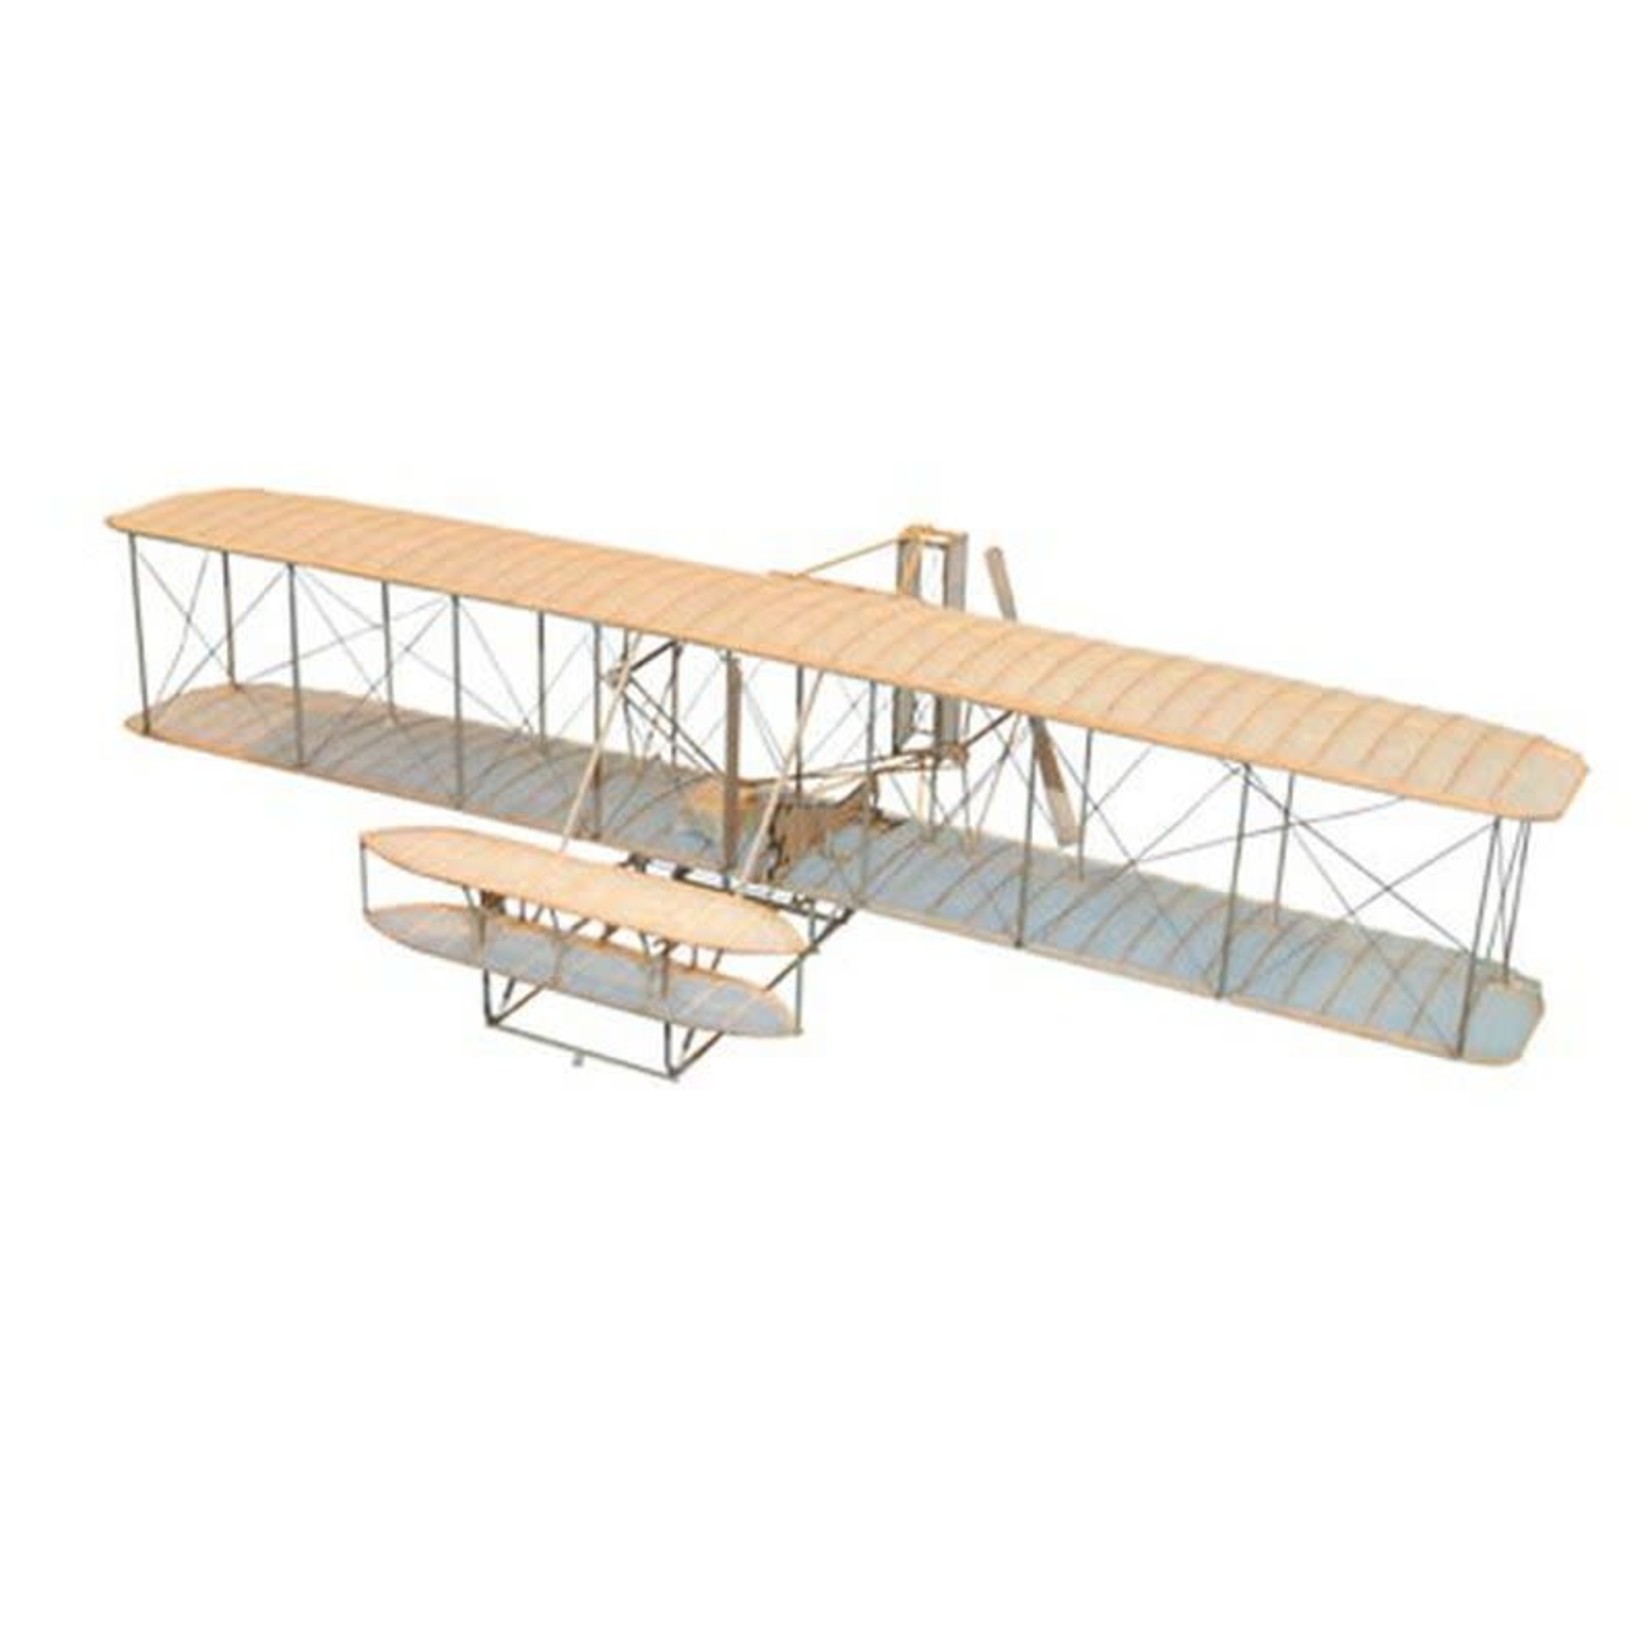 Guillow Guillow 1903 Wright Brothers Flyer #1202